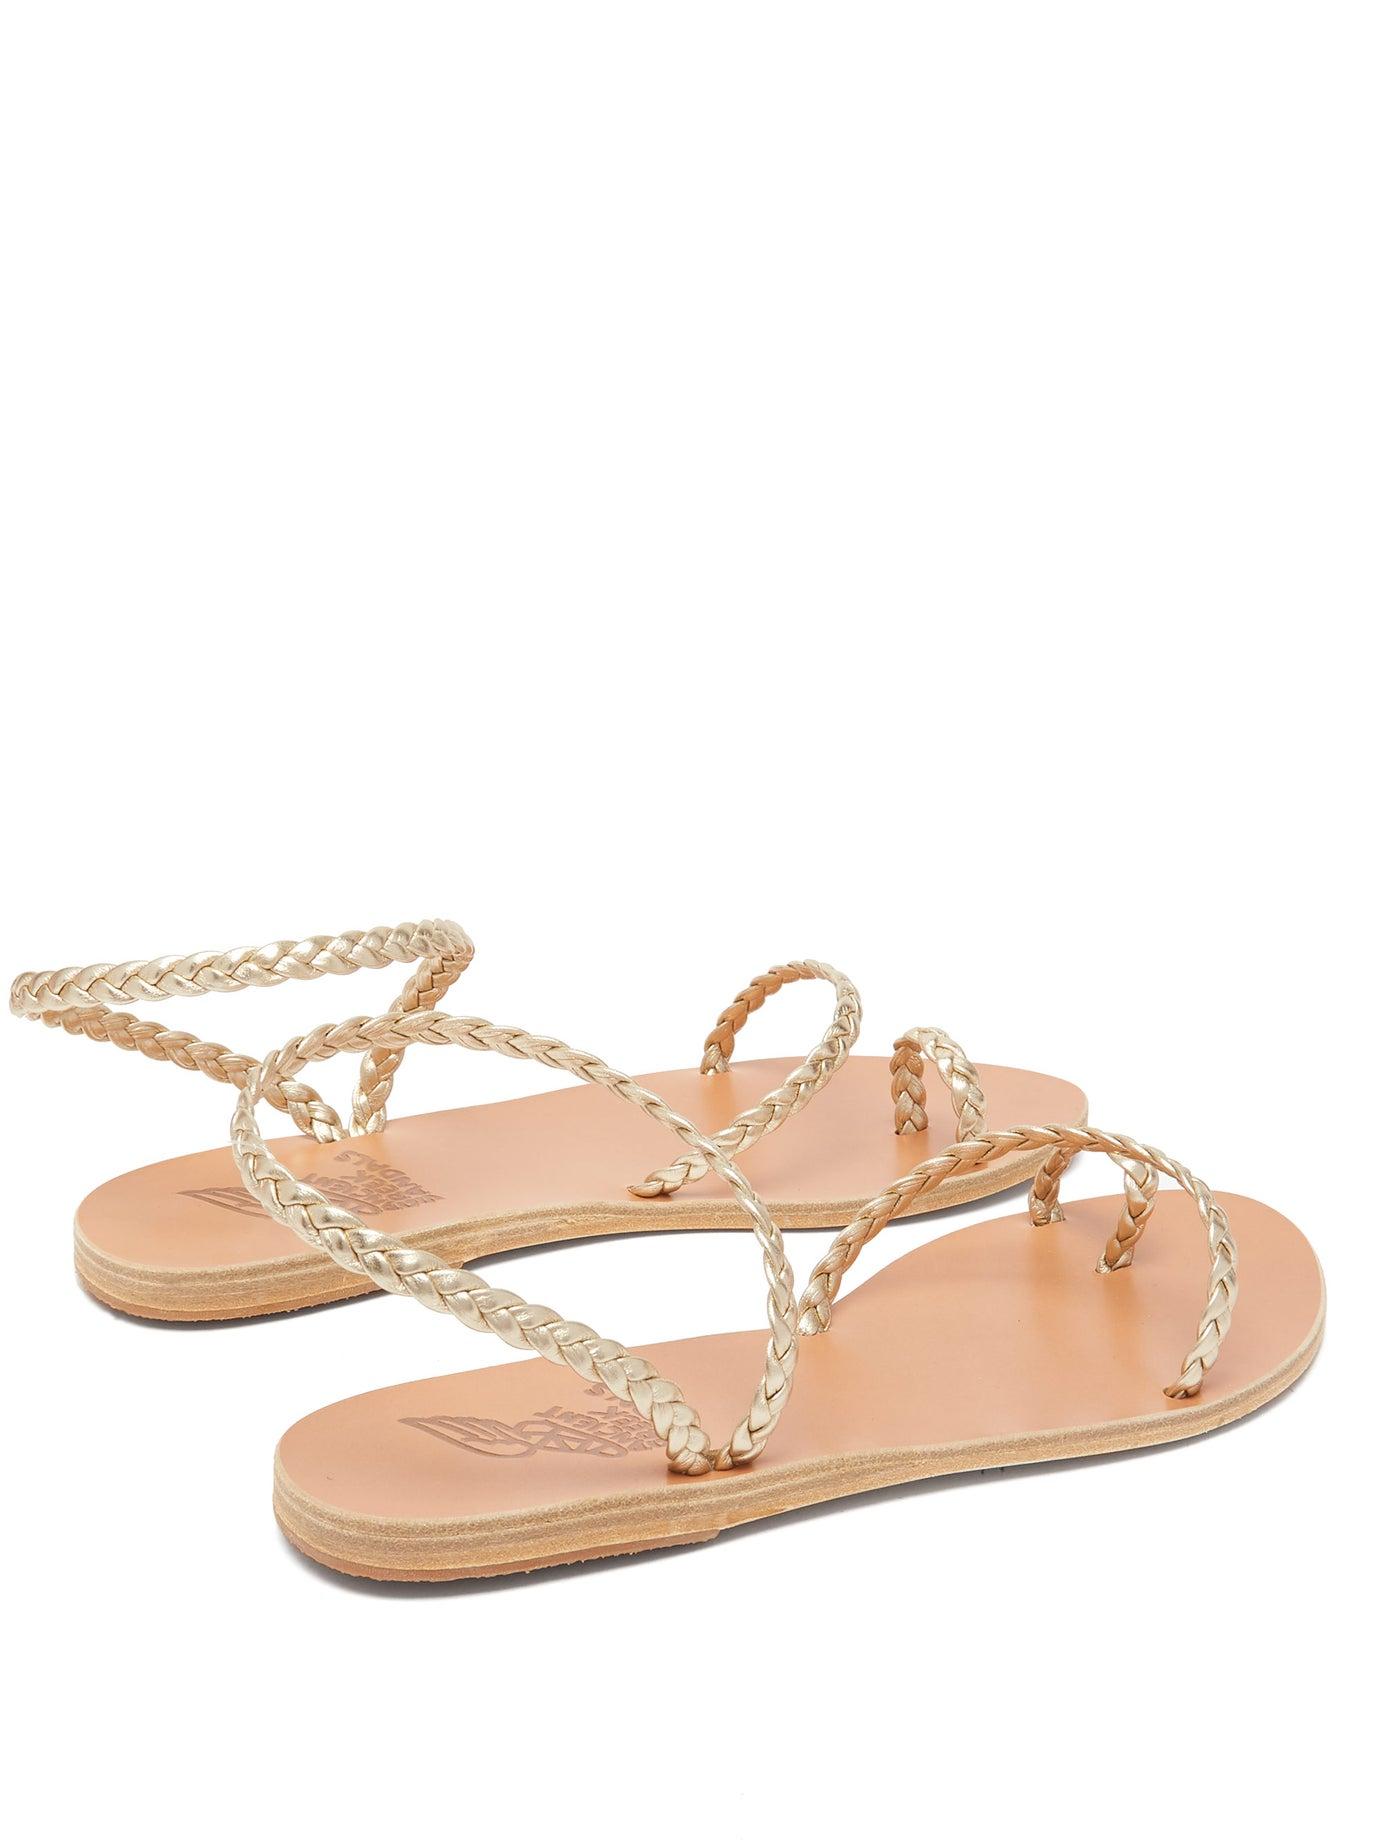 Ancient Greek Sandals Eleftheria Braided-leather Sandals in Gold ...